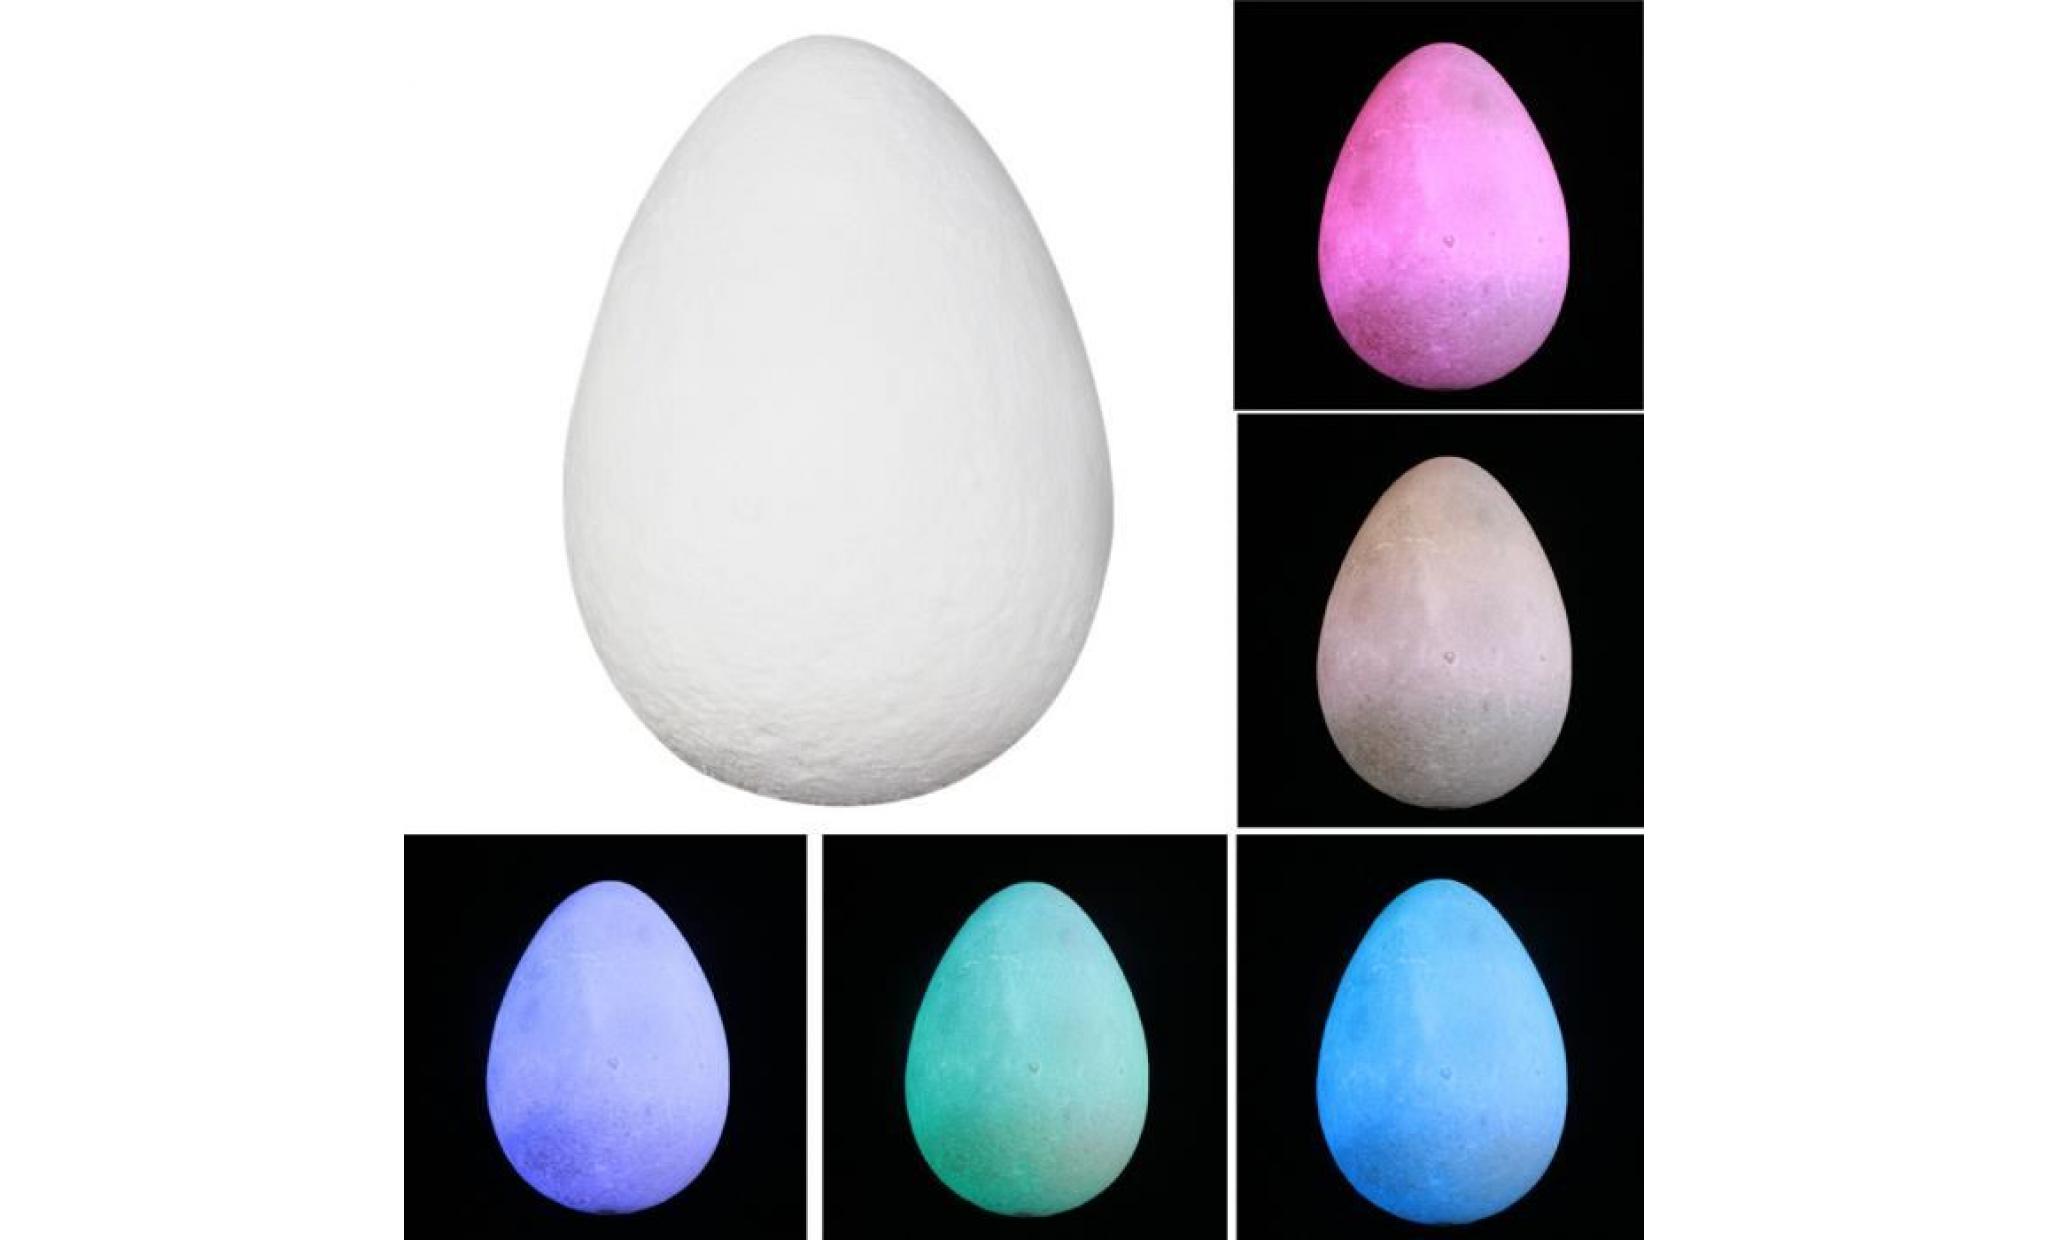 3d usb hand shot lights egg shaped night light table desk colorful lamp gift pageare3396 pageare3396